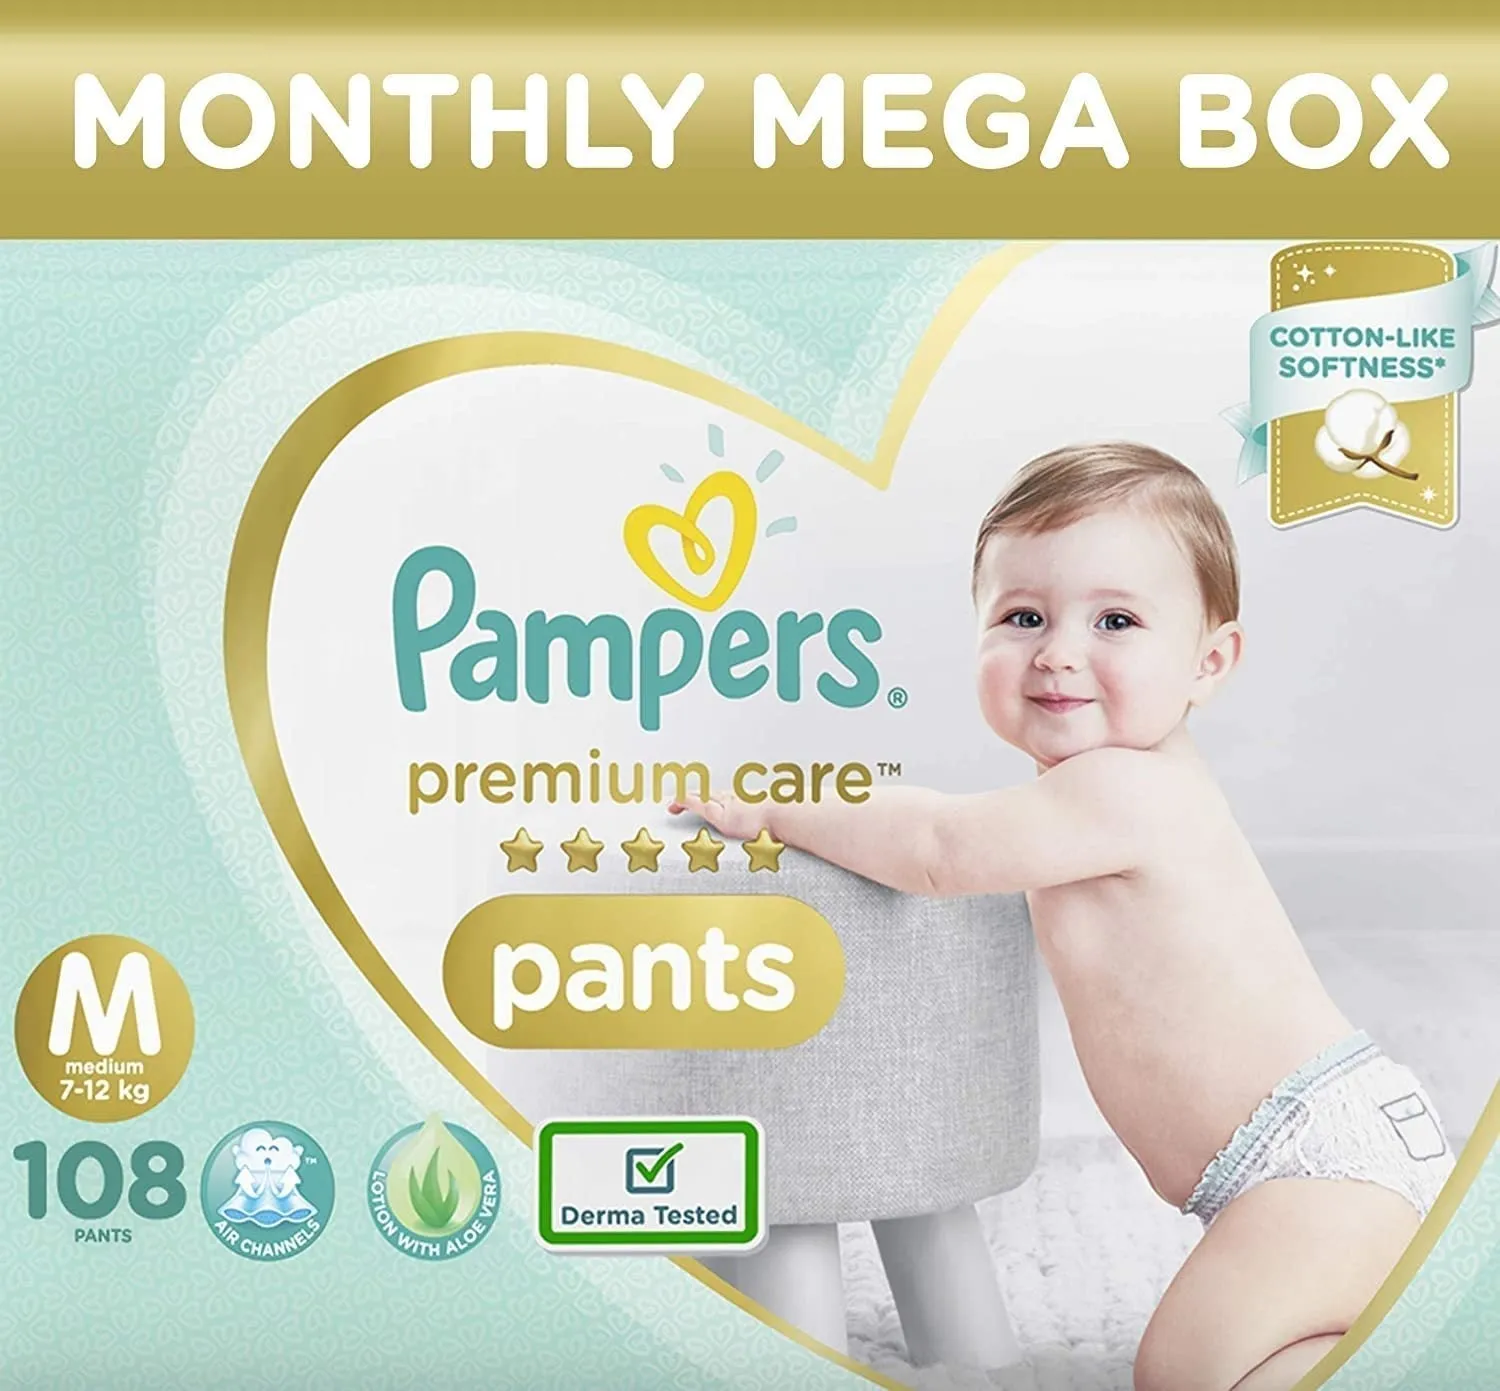 pampers premium care pants medium size baby diapers md 108 count product 1 1625057690317 64cee758 4f32 43e9 93f2 1f376375477f